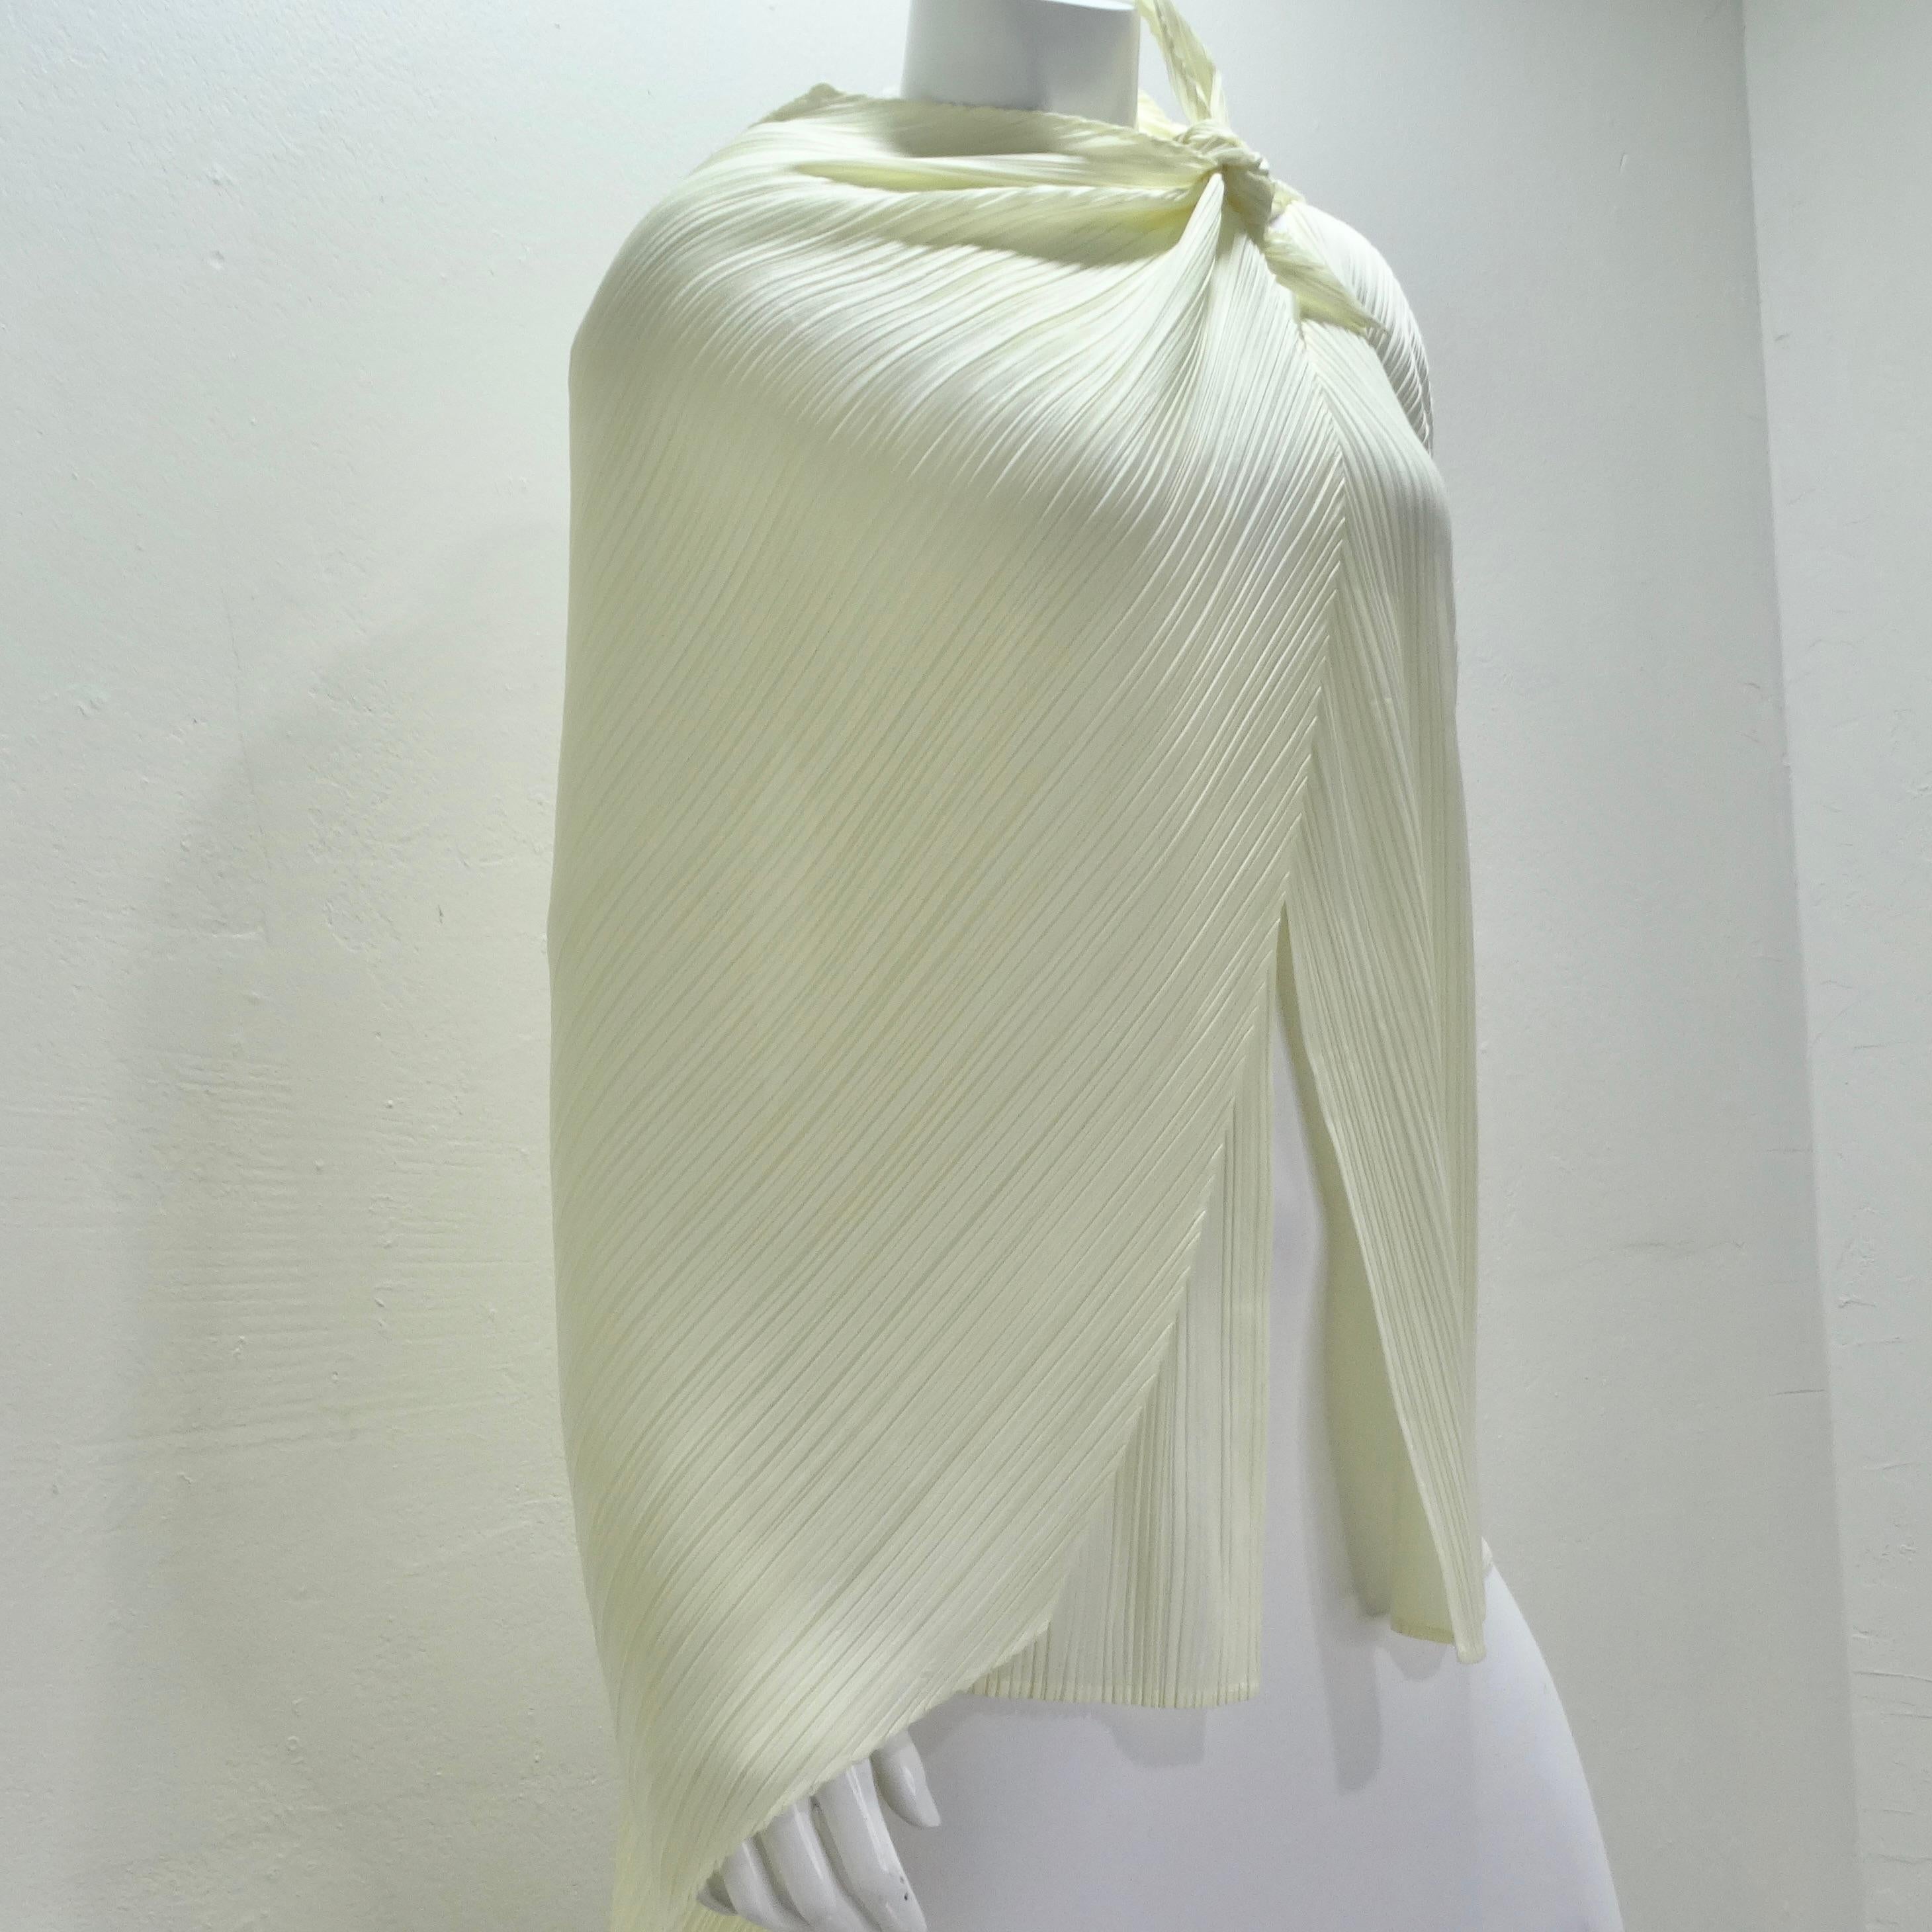 Issey Miyake Pleats Please Cardigan and Shawl Set Off-White In Excellent Condition For Sale In Scottsdale, AZ